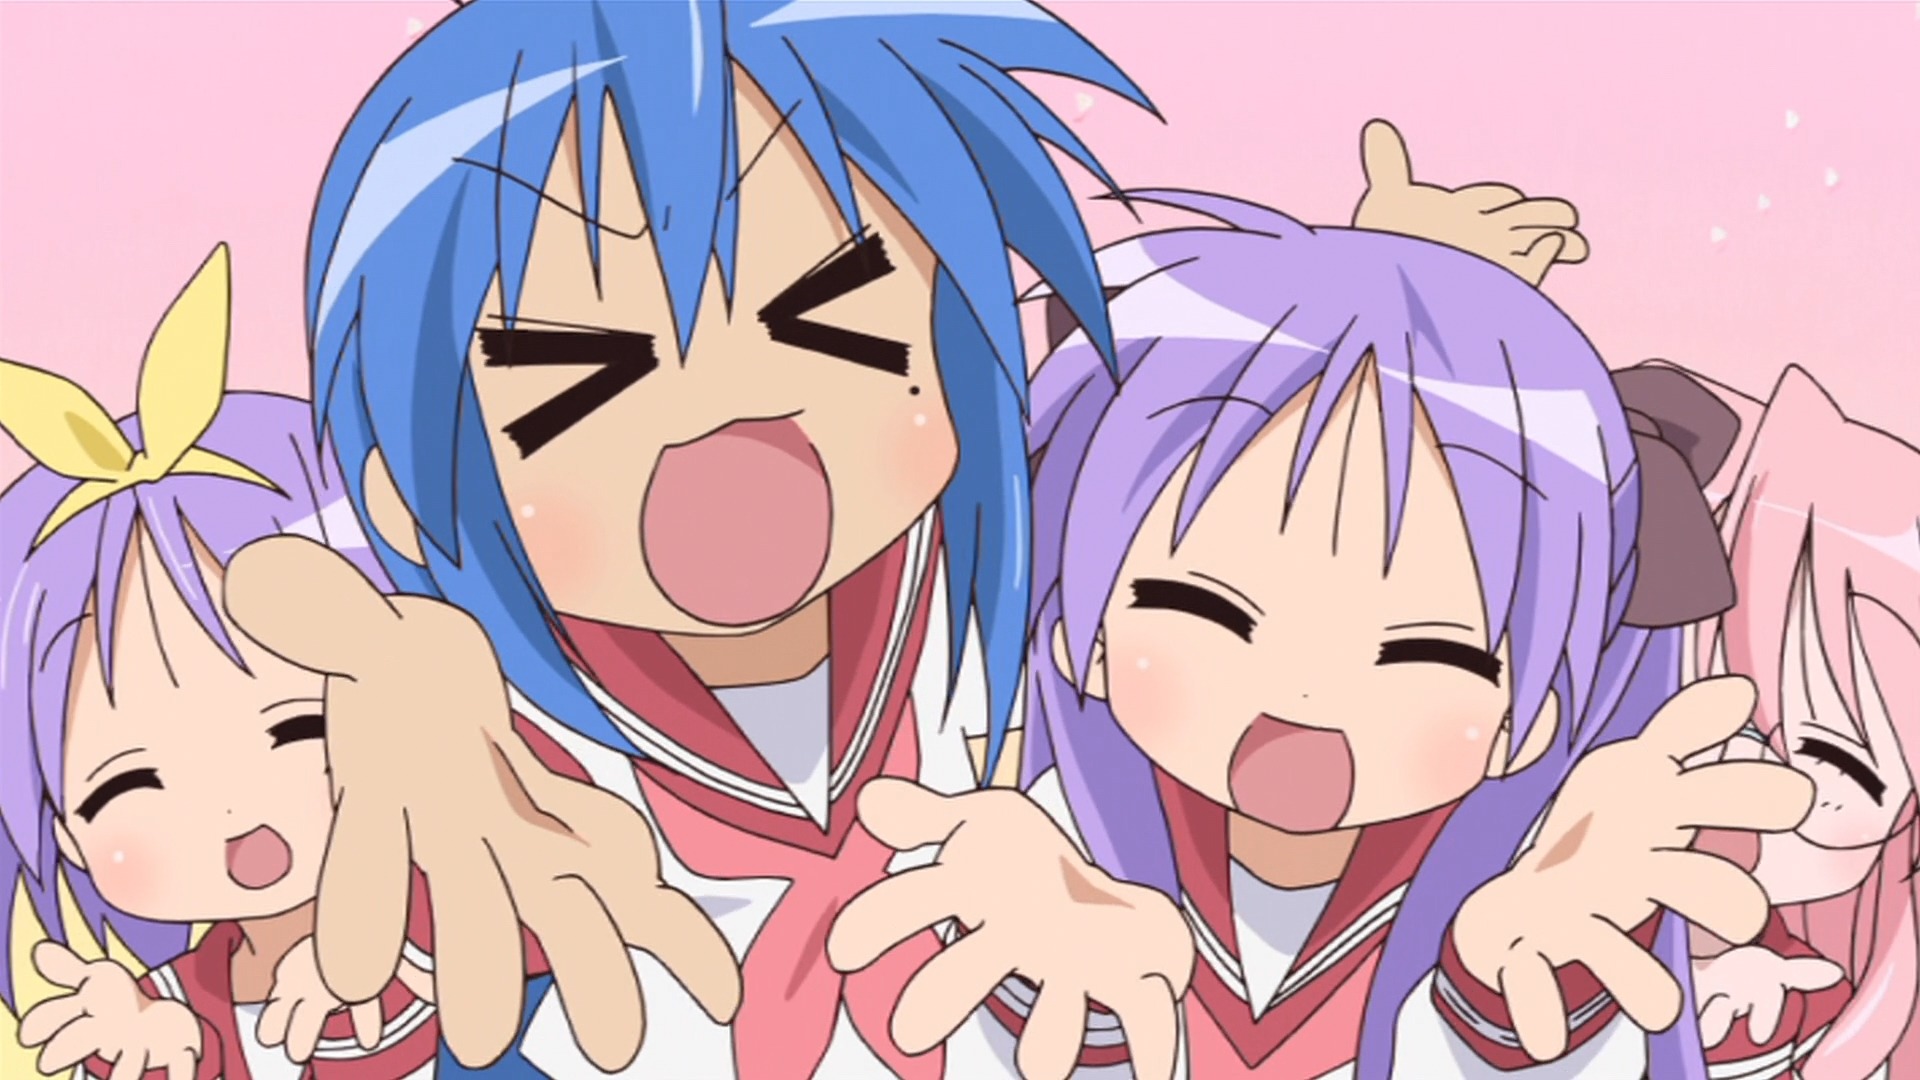 Lucky star manga es back from hiatus after eight years